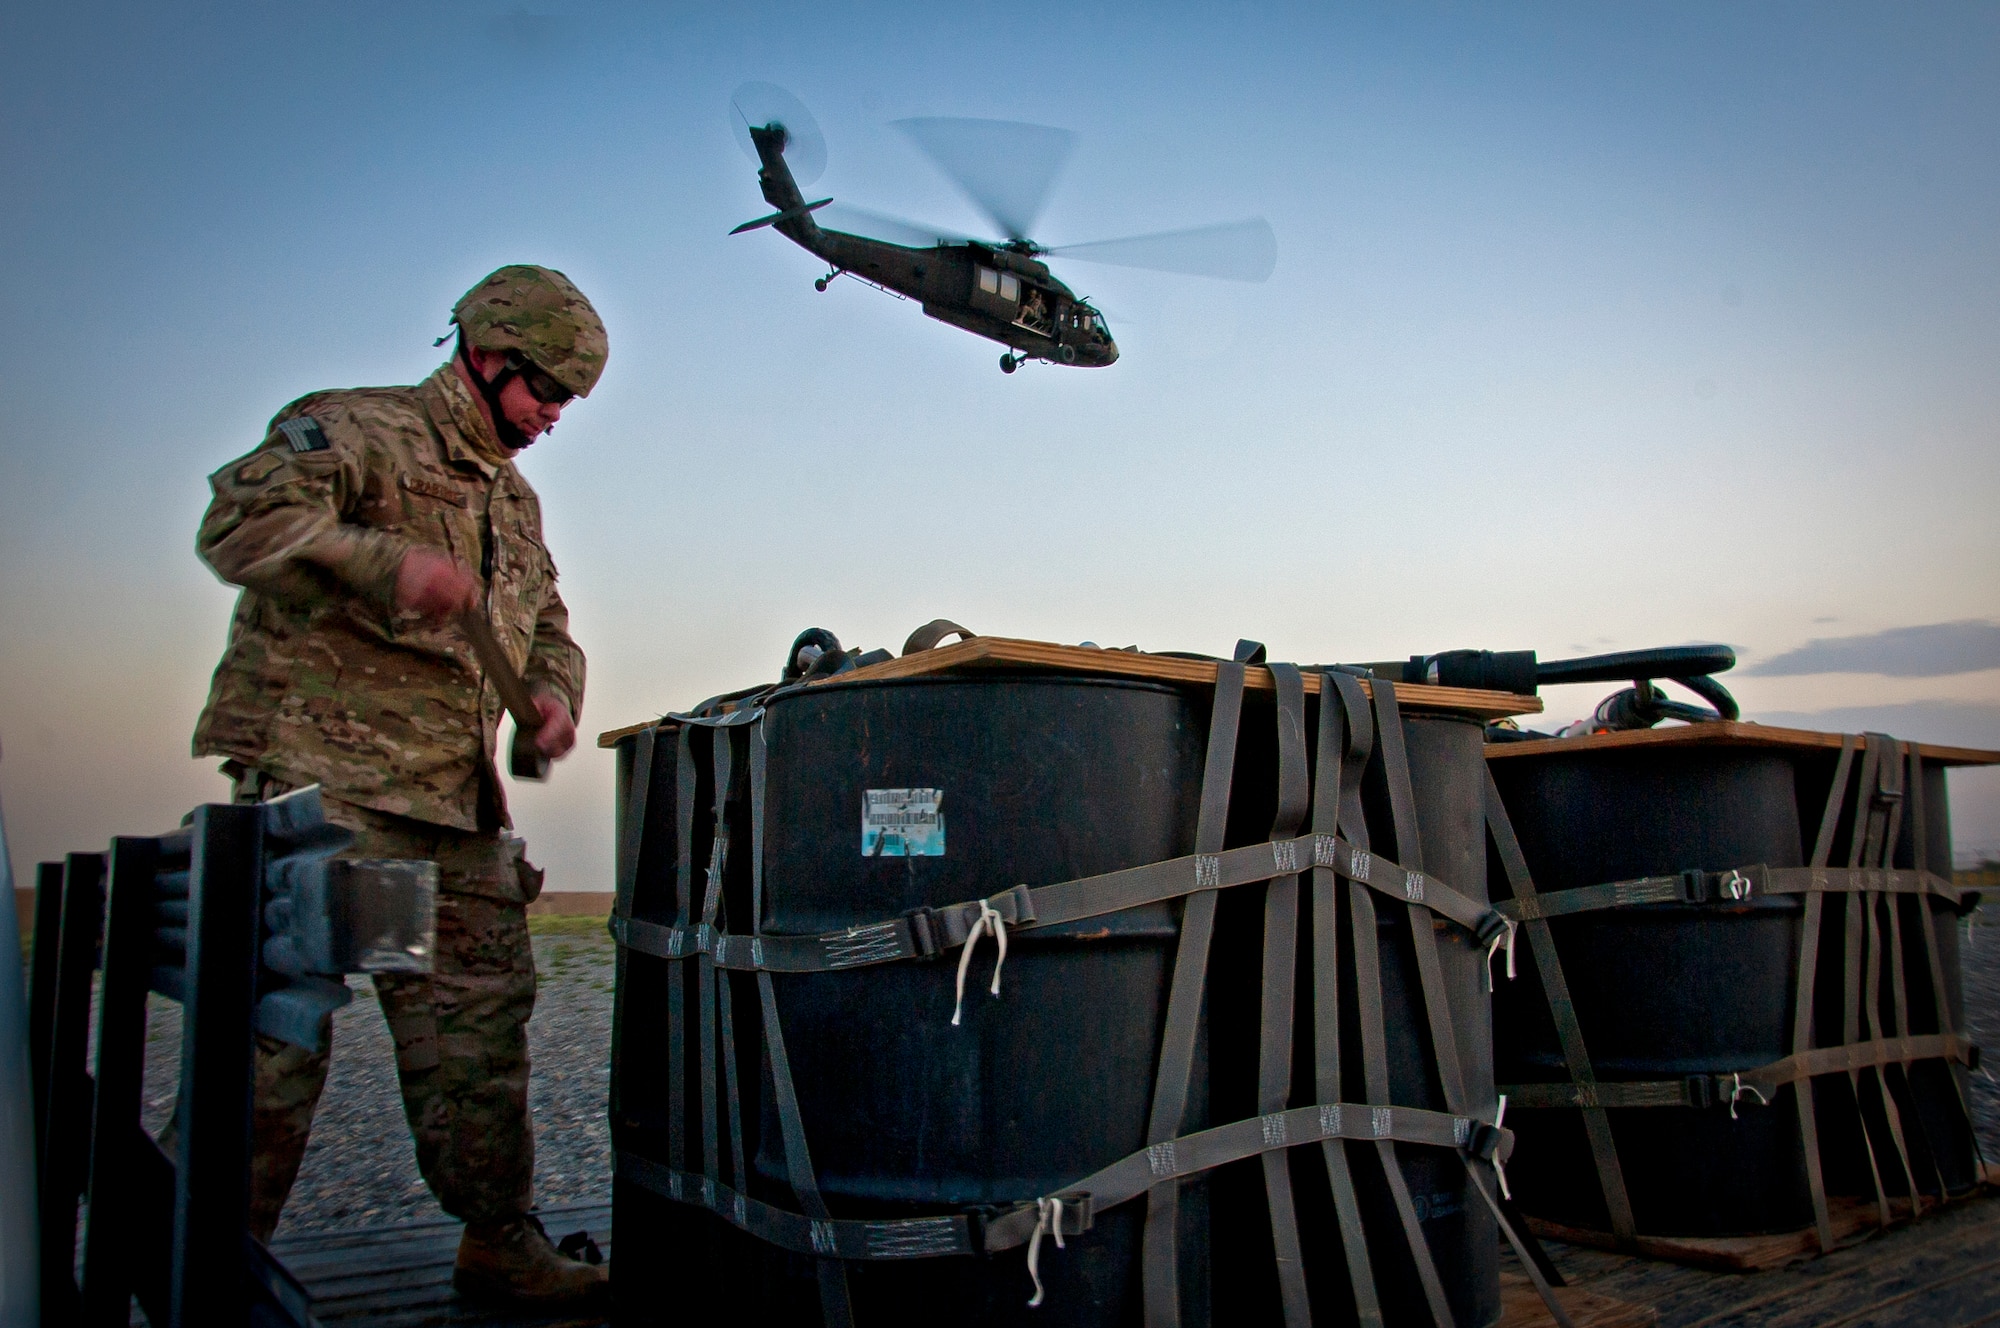 U.S. Air Force Senior Master Sgt. Gwen Crabtree, 451st Expeditionary Logistics Readiness Squadron, prepares an A-22 cargo bag before a UH-60 Black Hawk helicopter conducts an in-flight cargo sling load during a joint-coalition training mission at Kandahar Airfield, Afghanistan, June 1, 2013. The training provided coalition members the opportunity to learn the concepts of marking a landing zone as well as in-flight cargo sling loading. (U.S. Air Force photo/Senior Airman Scott Saldukas)